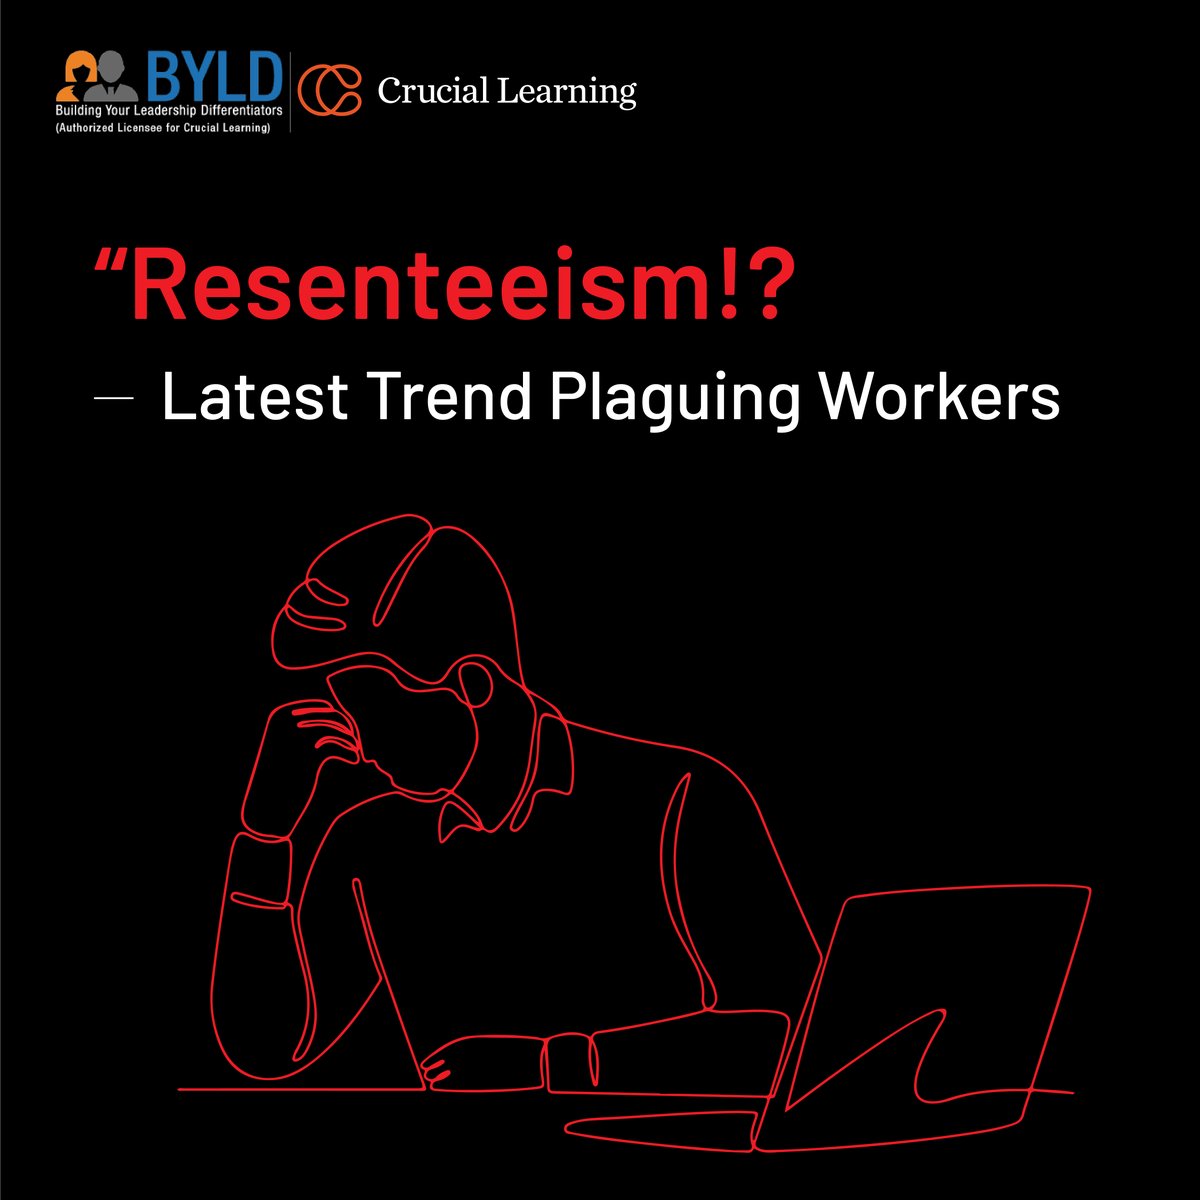 Remaining at a job while feeling intense dissatisfaction or resentment toward it is called 'resenteeism.'

It's a worrying tendency in the workplace that has negative consequences for both the recruiters and the individuals involved.

#CrucialSkills #Resenteeism #HealthyWorkforce